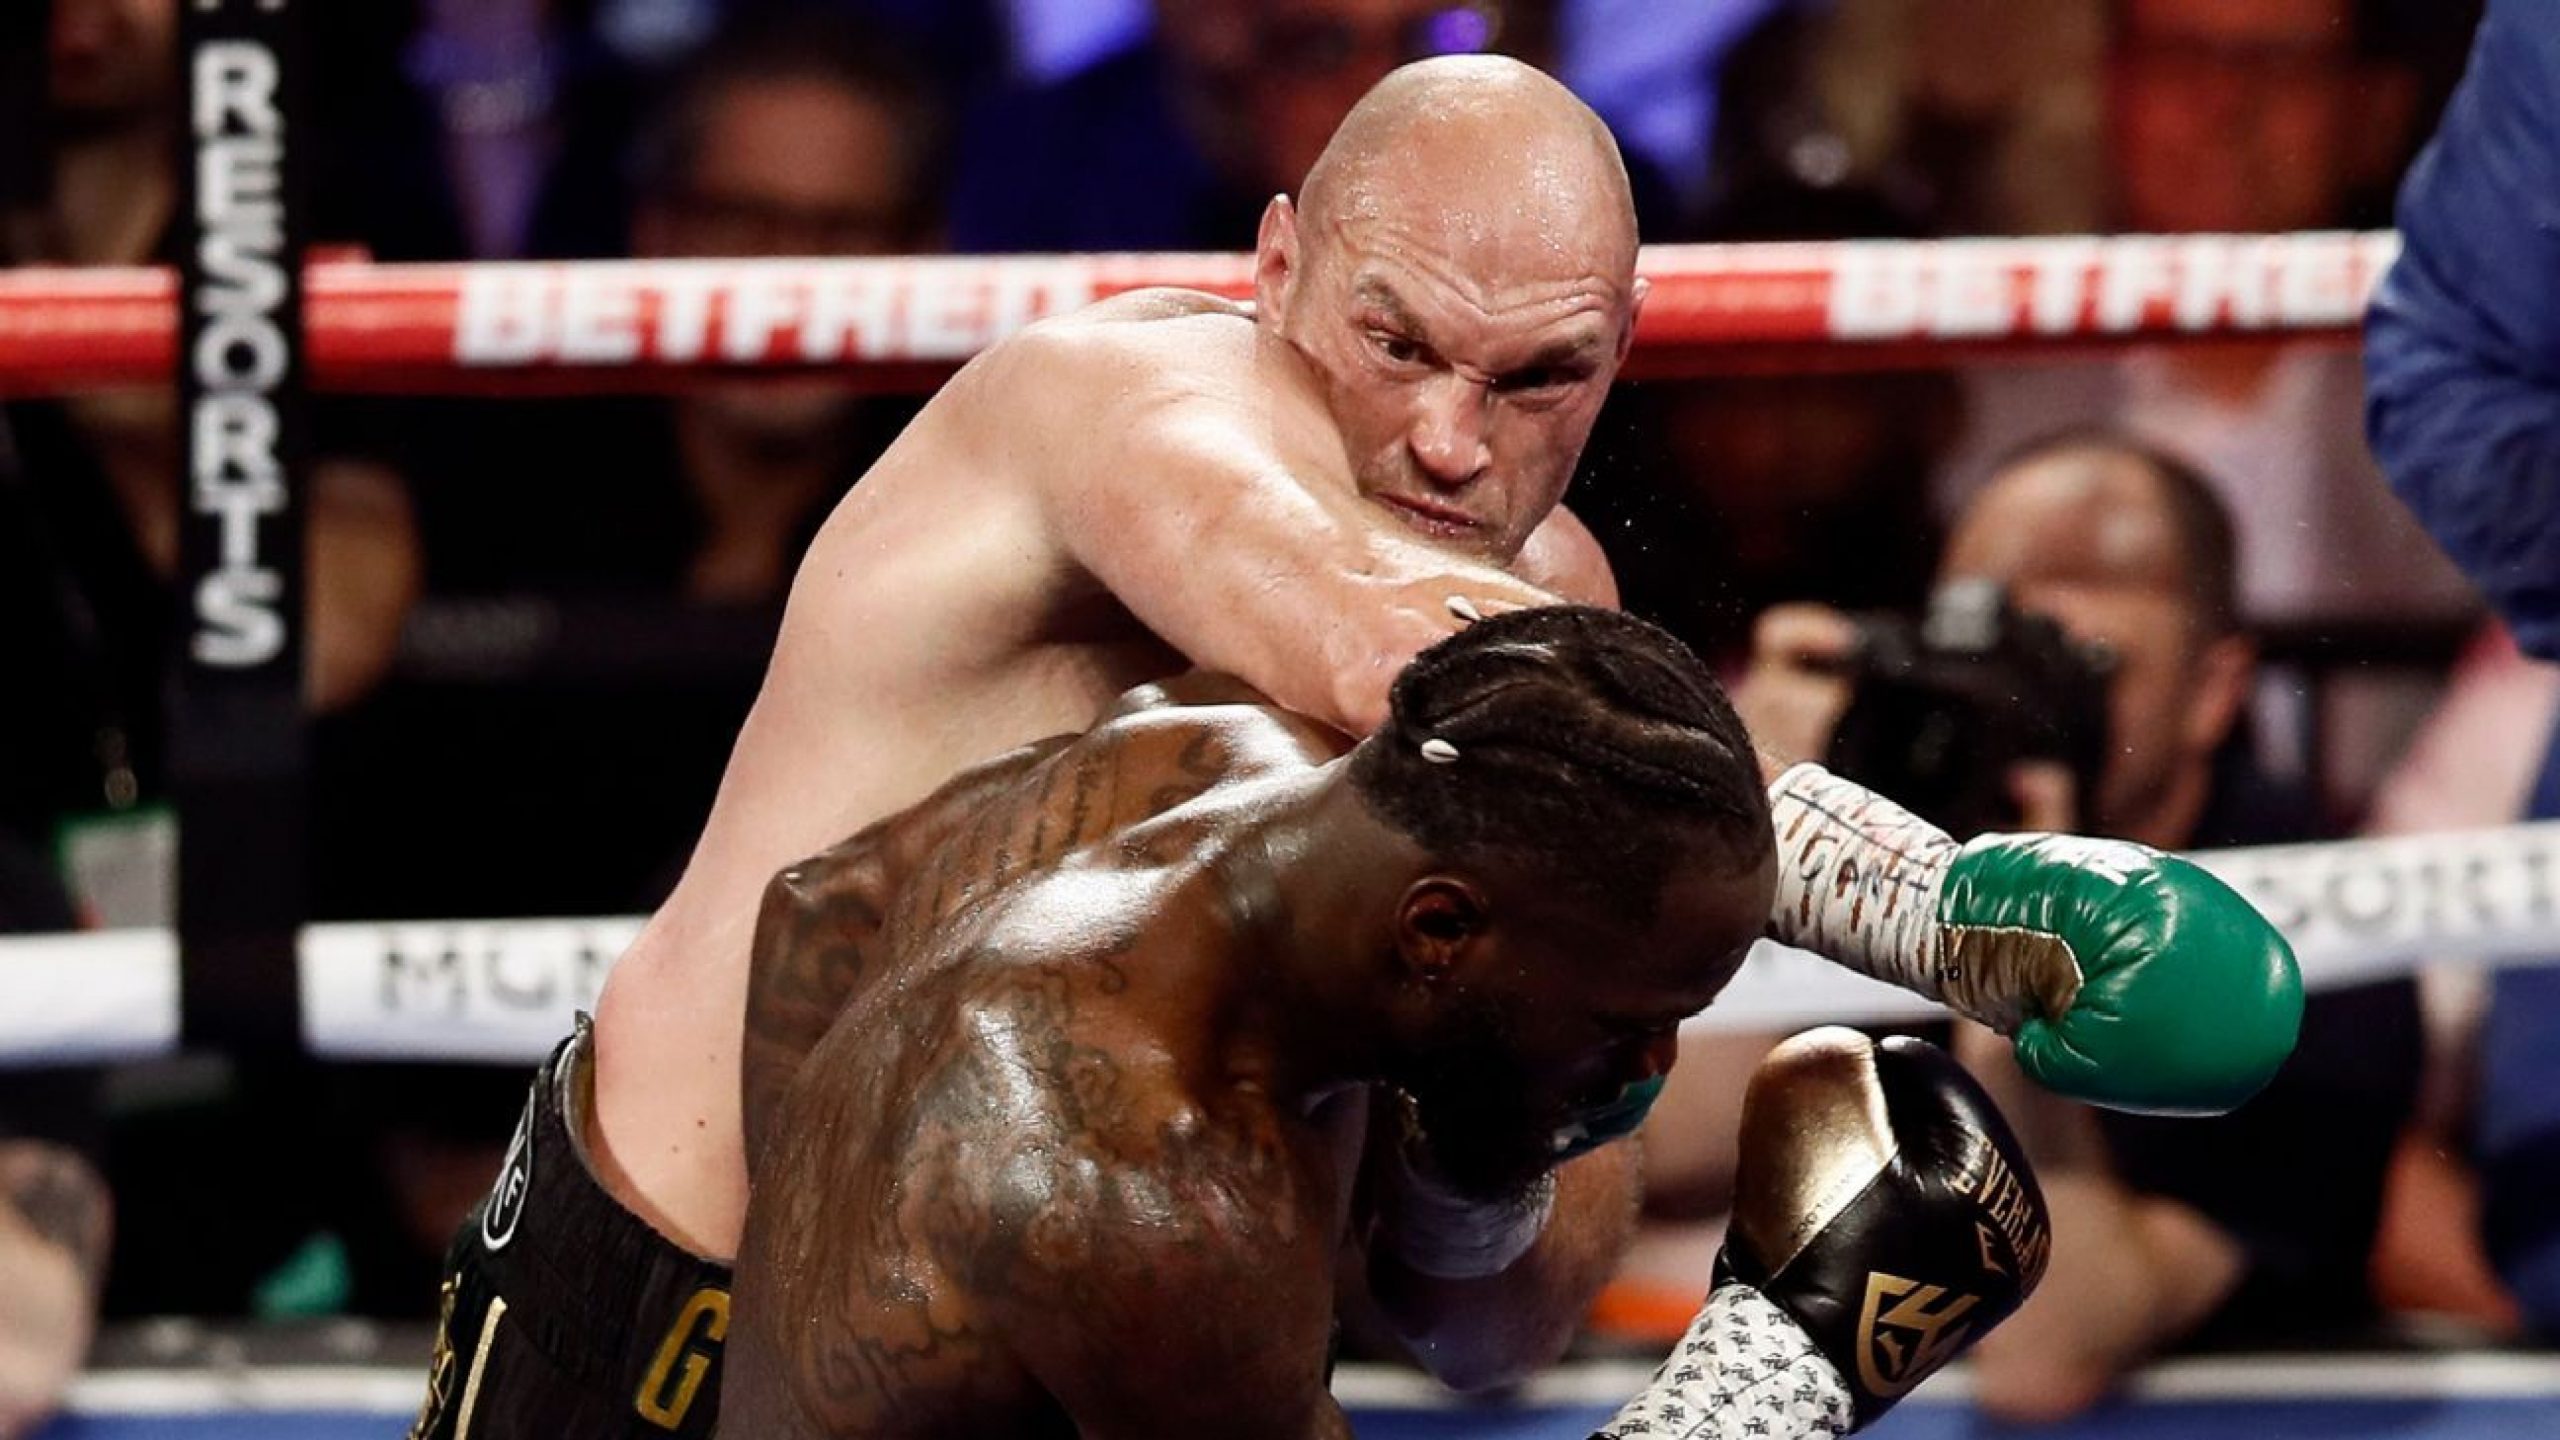 Sources: Fury positive; Wilder bout postponed